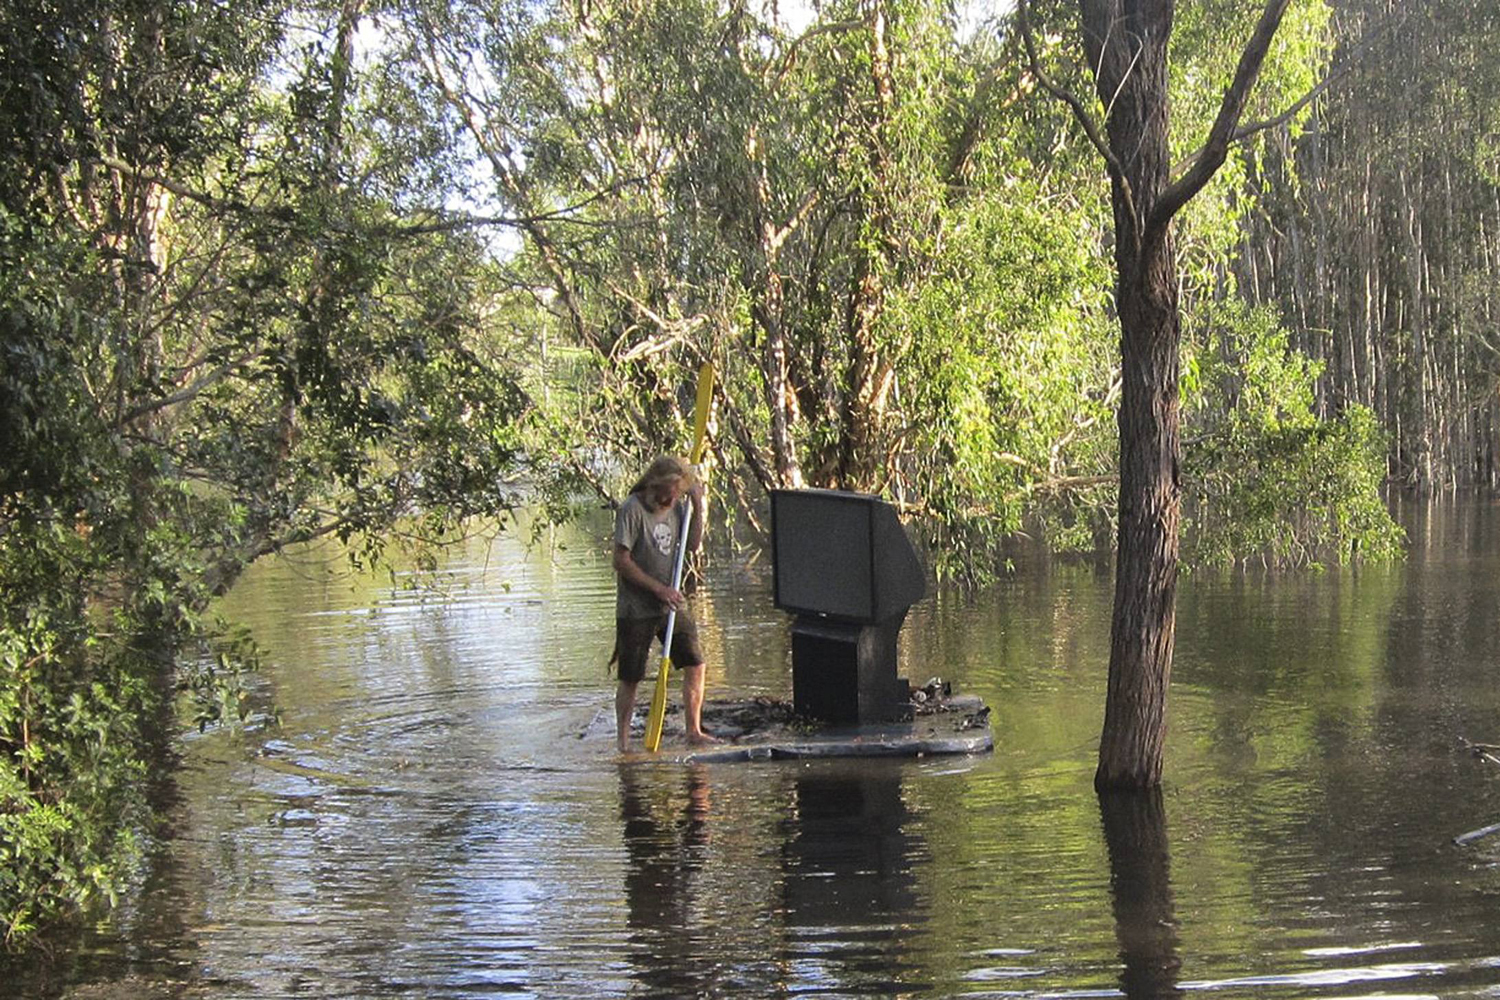 A man uses a spa cover to move a TV set through floodwaters at Cornubia